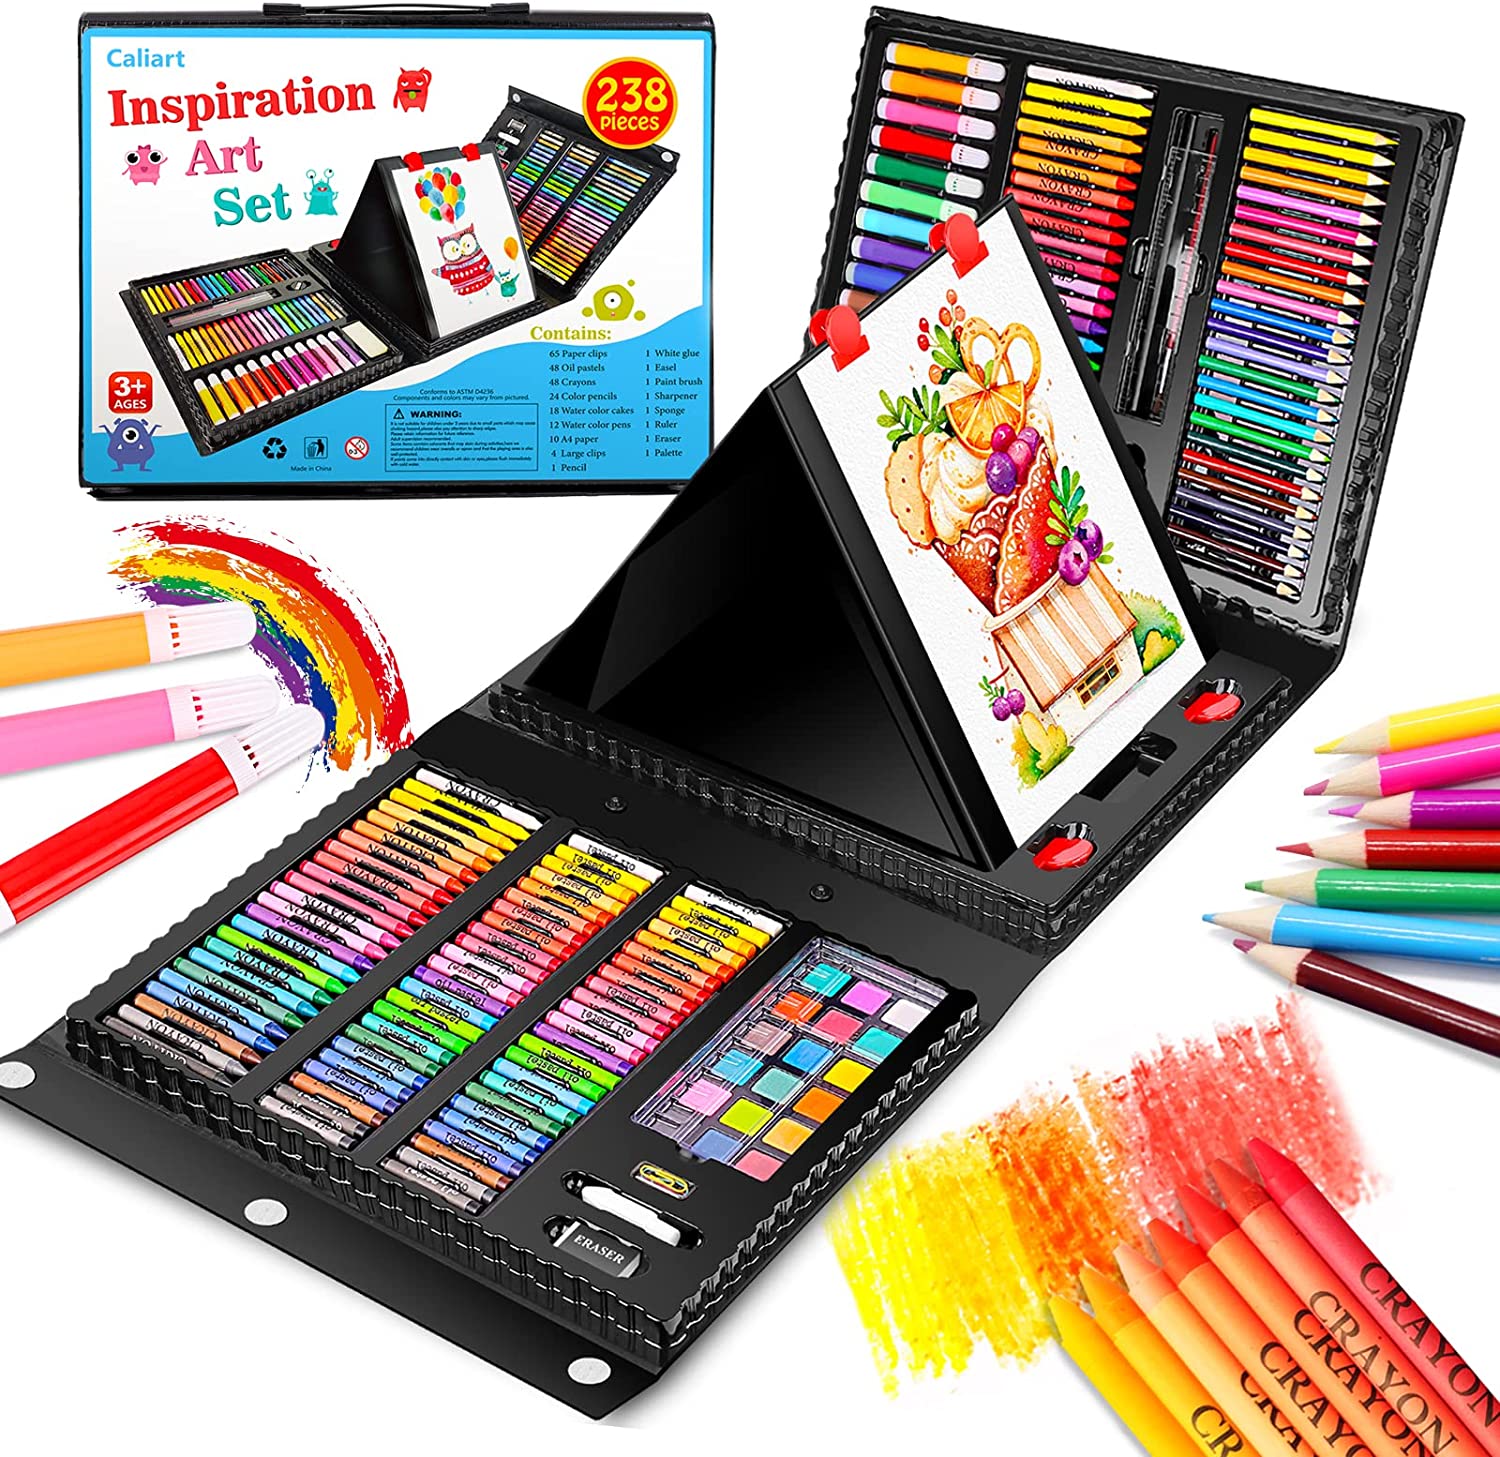 Shuttle Art Drawing Kit, 103 Pack Drawing Pencils Set, Sketching and Drawing  Art Set with Colored Pencils, Sketch and Graphite Pencils in Portable Case,  Drawing Supplies for Kids, Adults and Artists